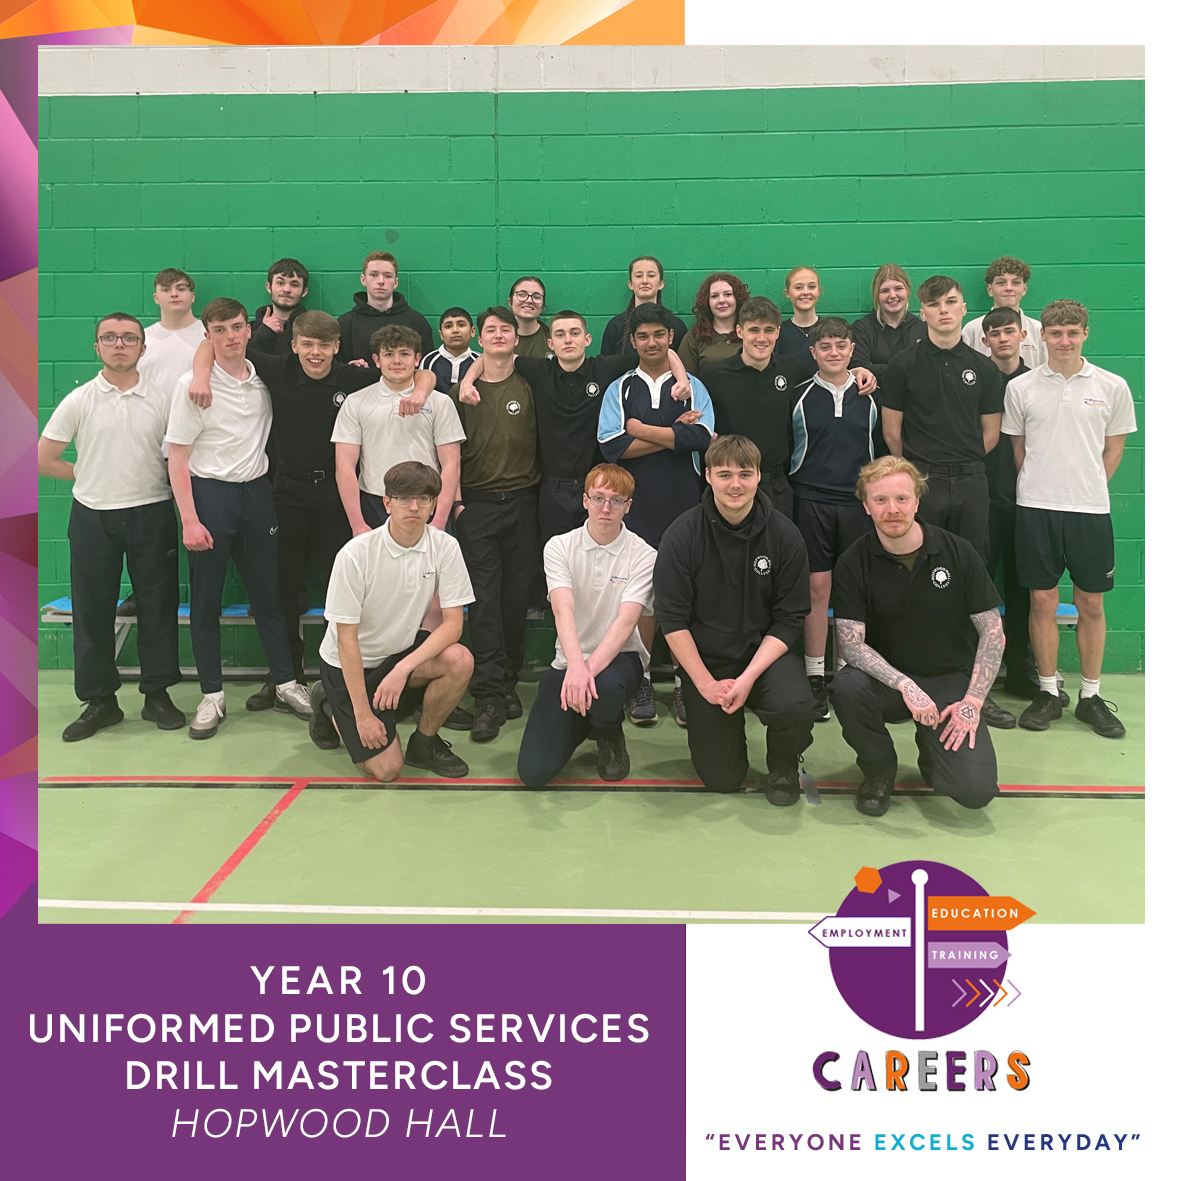 On a trip to Hopwood Hall's Middleton Campus our Y10 students interested in Uniformed Public Services immersed themselves in a day packed with experiences:👮‍♂️ Drill Session, 🤝 Teambuilding Session & 💼 Careers Talk! @WCSQM #raisingrochdale #worldclass #everyoneexcelseveryday